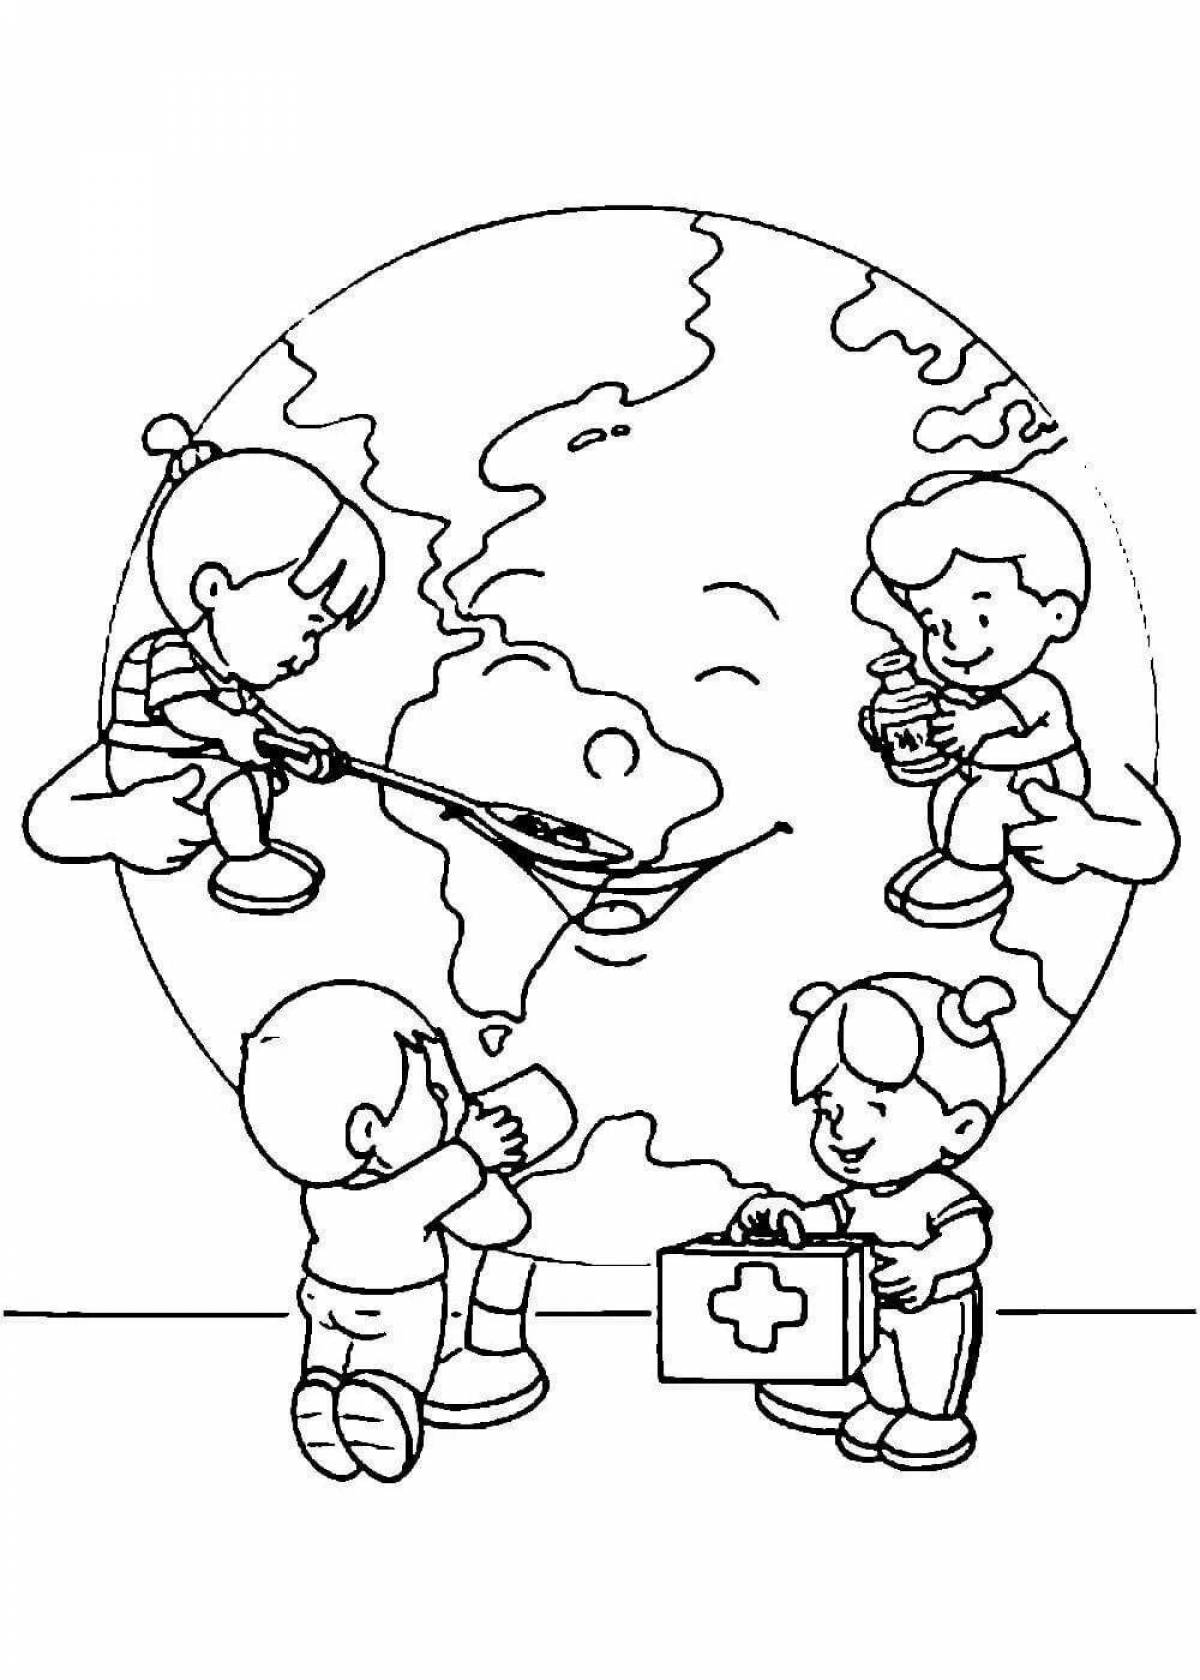 Radiant save nature poster coloring page